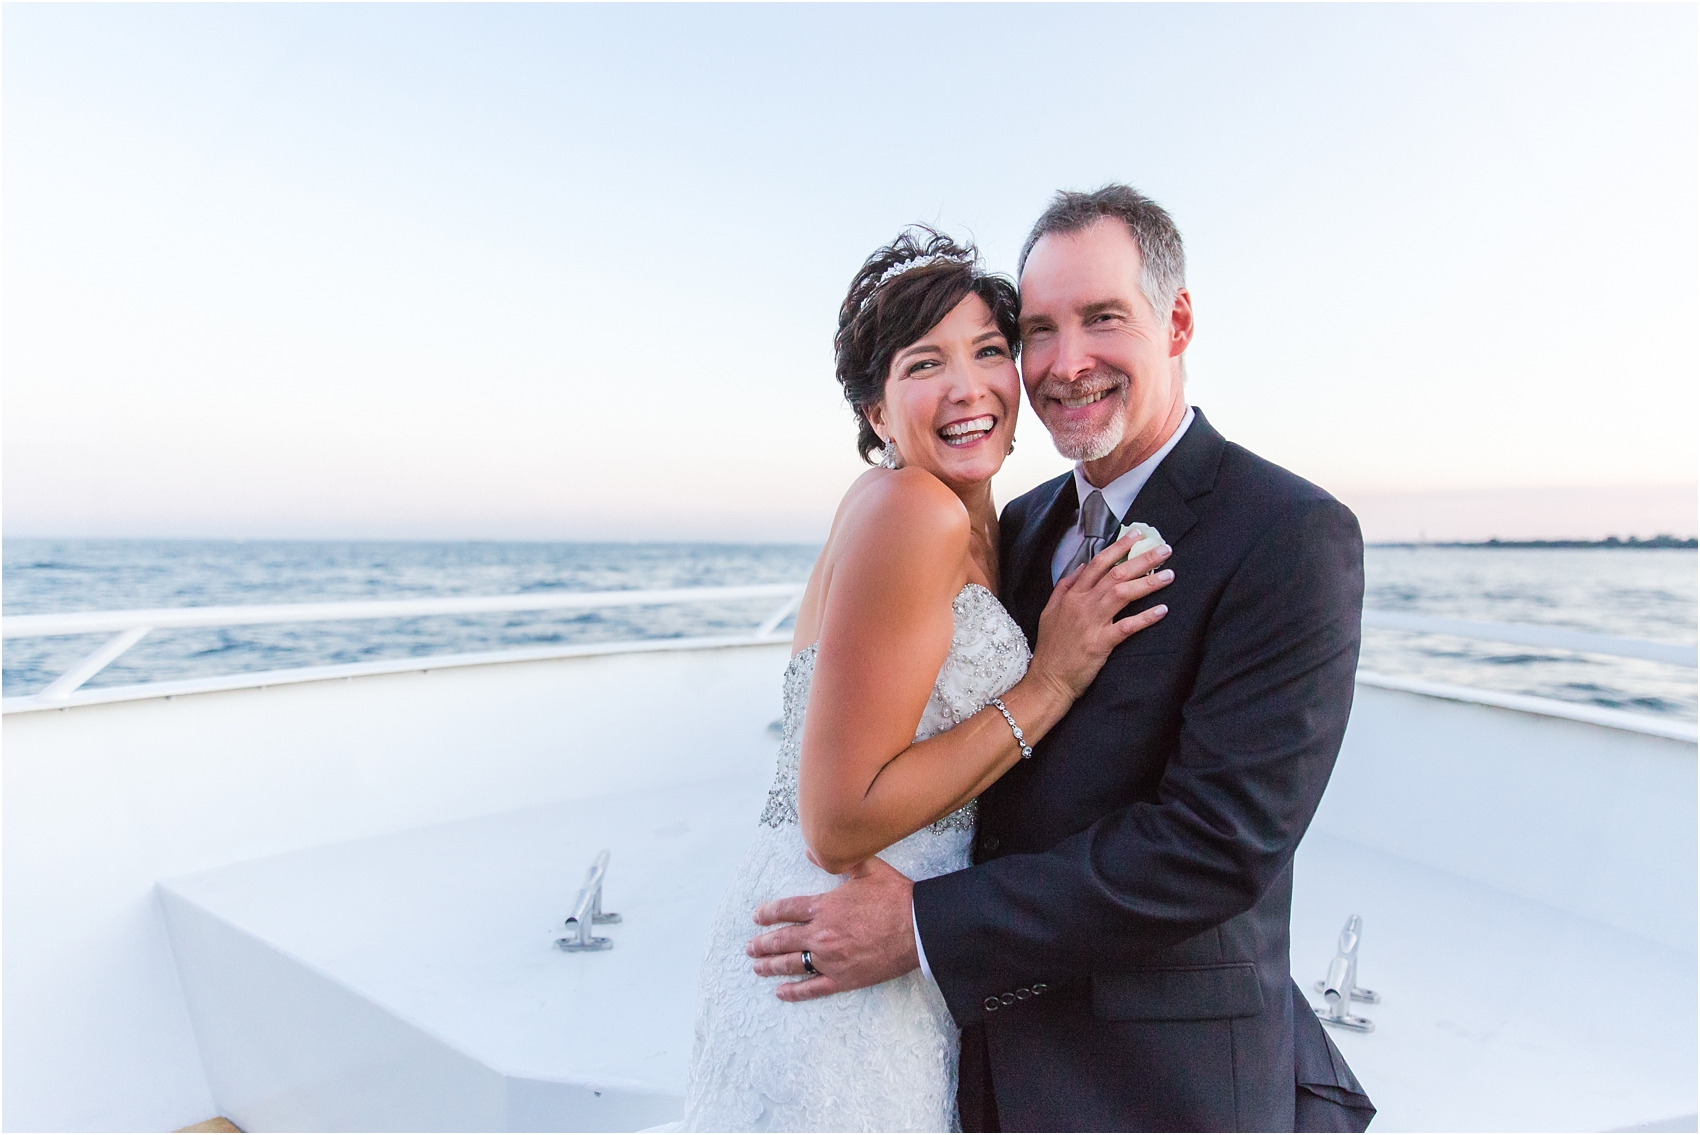 classic-natuical-inspired-wedding-photos-on-infinity-ovation-yacht-in-st-clair-shores-mi-by-courtney-carolyn-photography_0075.jpg